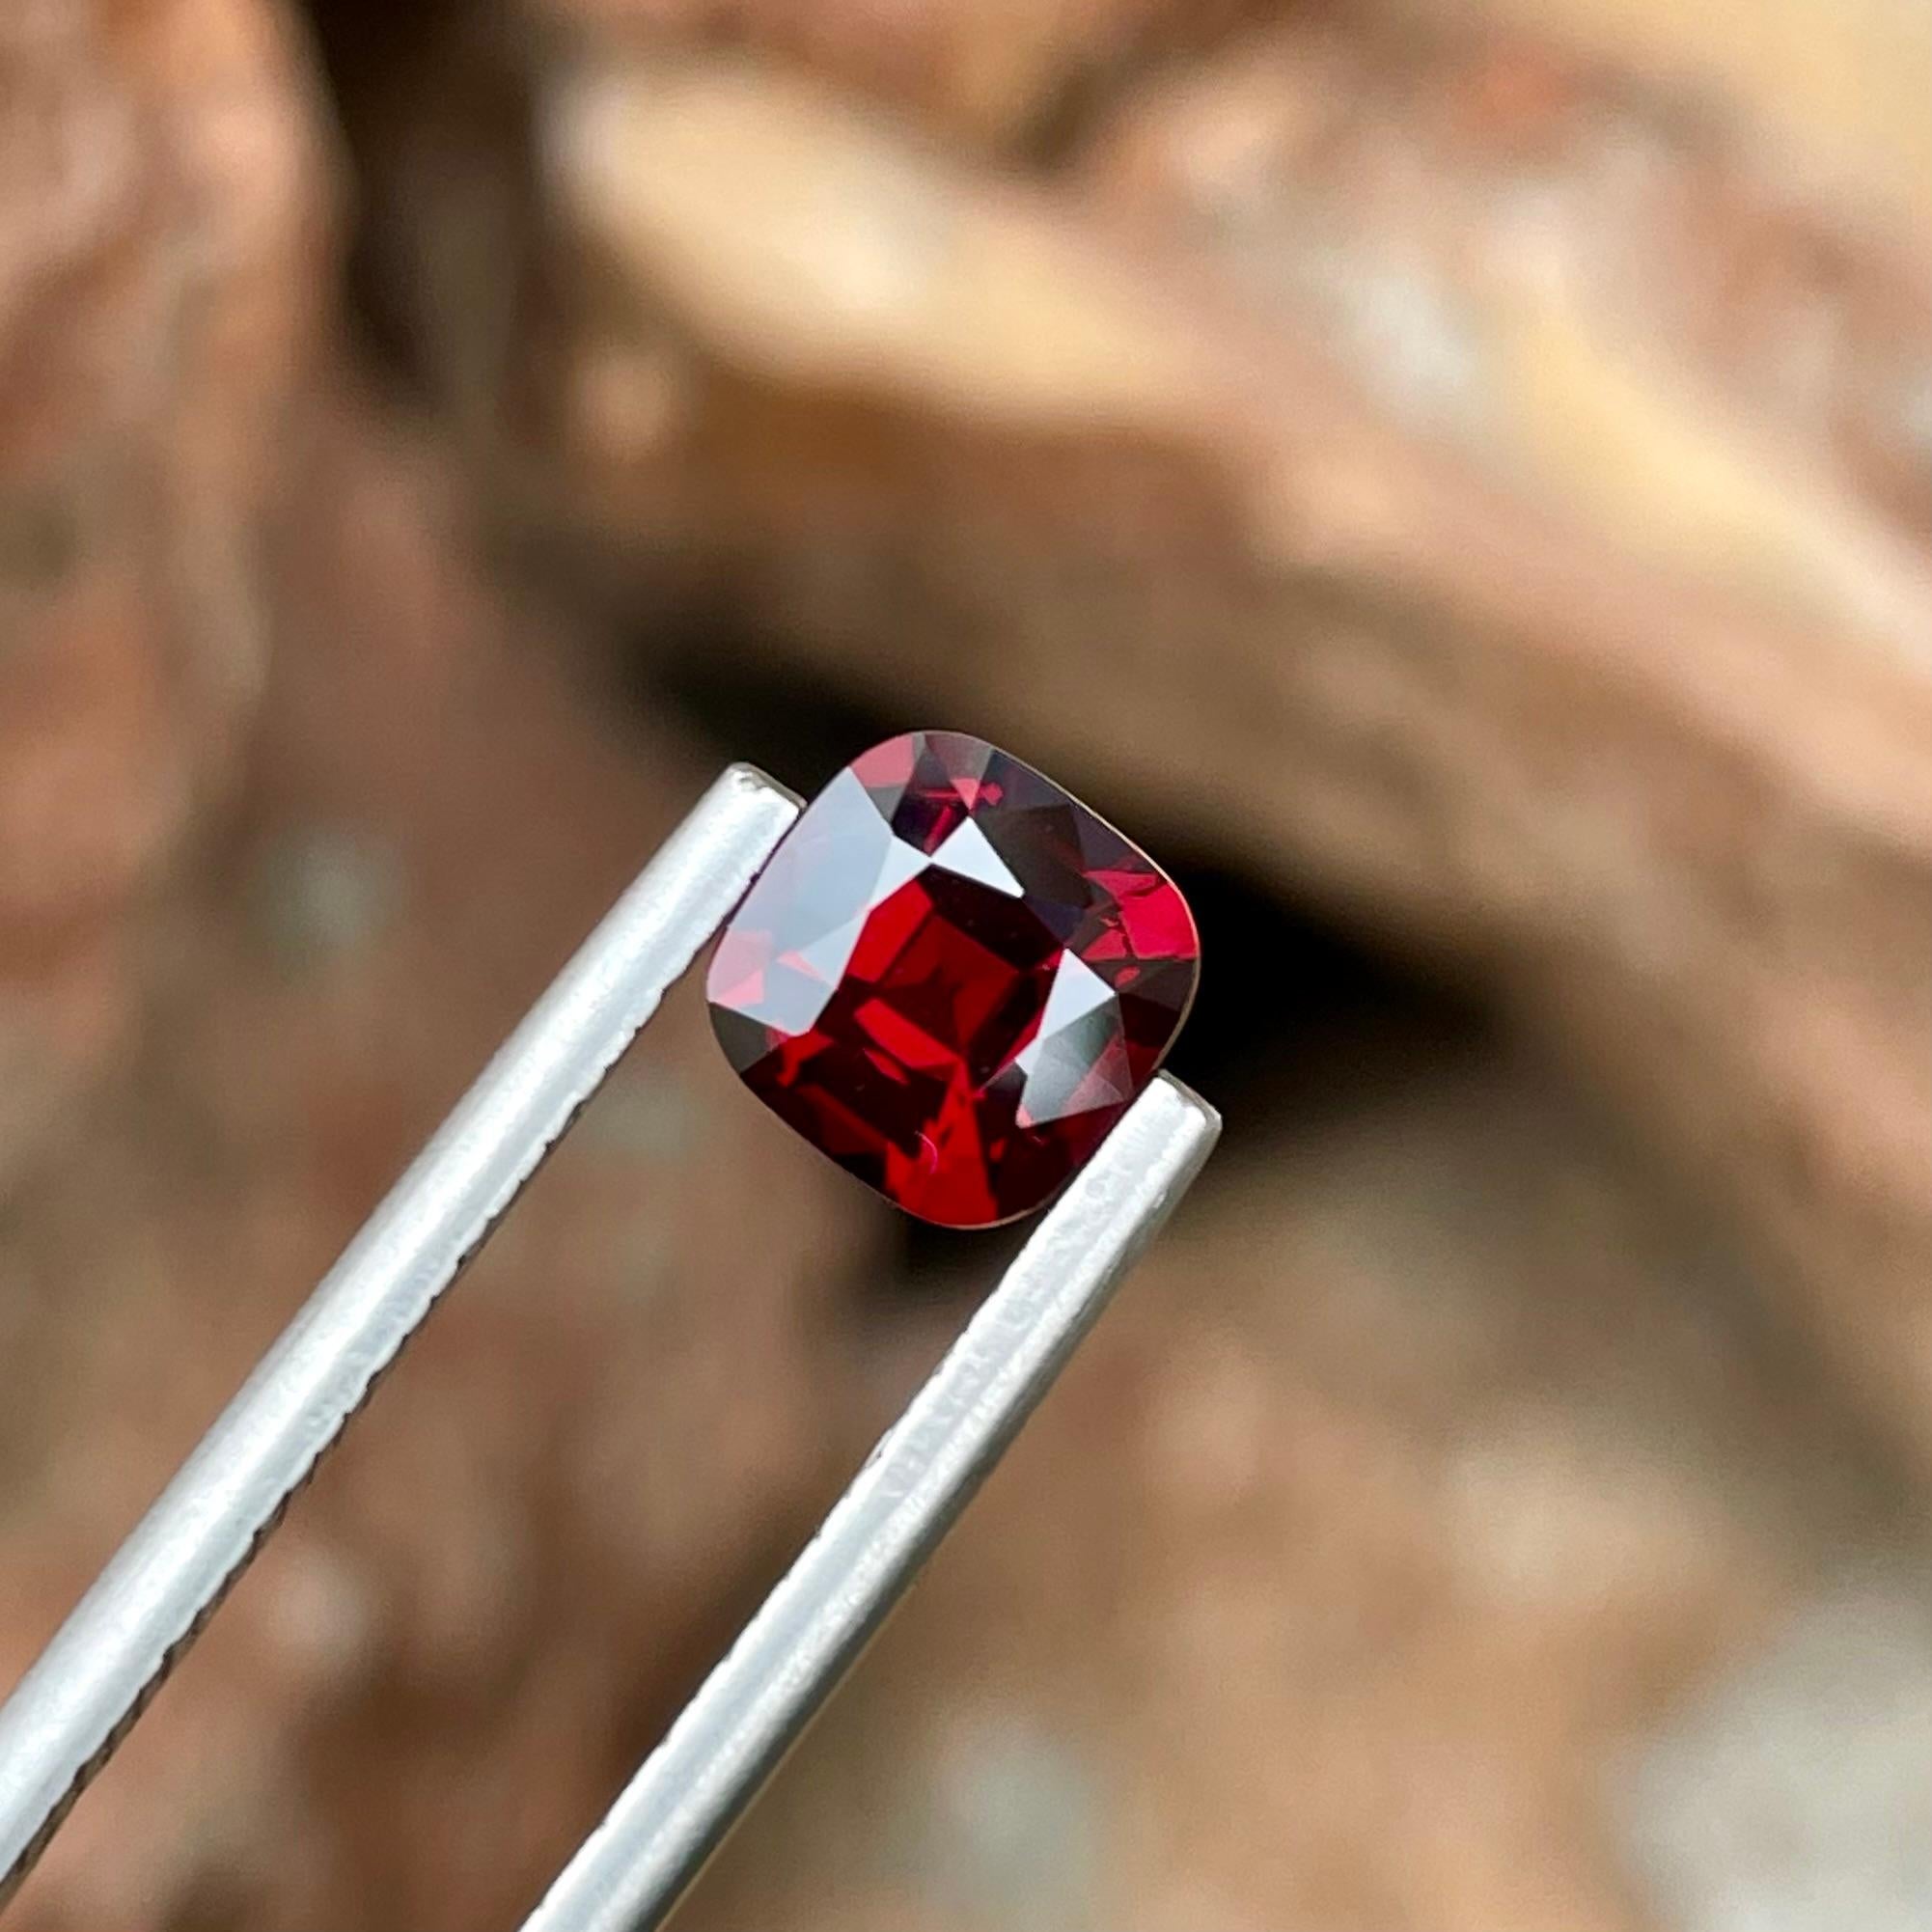 Weight 1.55 carats 
Dimensions 6.67x6.65x4.40 mm
Treatment none 
Origin Burma 
Clarity VVS
Shape cushion 
Cut fancy cushion 




Behold the allure of this exquisite 1.55 carats Red Burmese Spinel, a gemstone of unparalleled beauty and rarity.